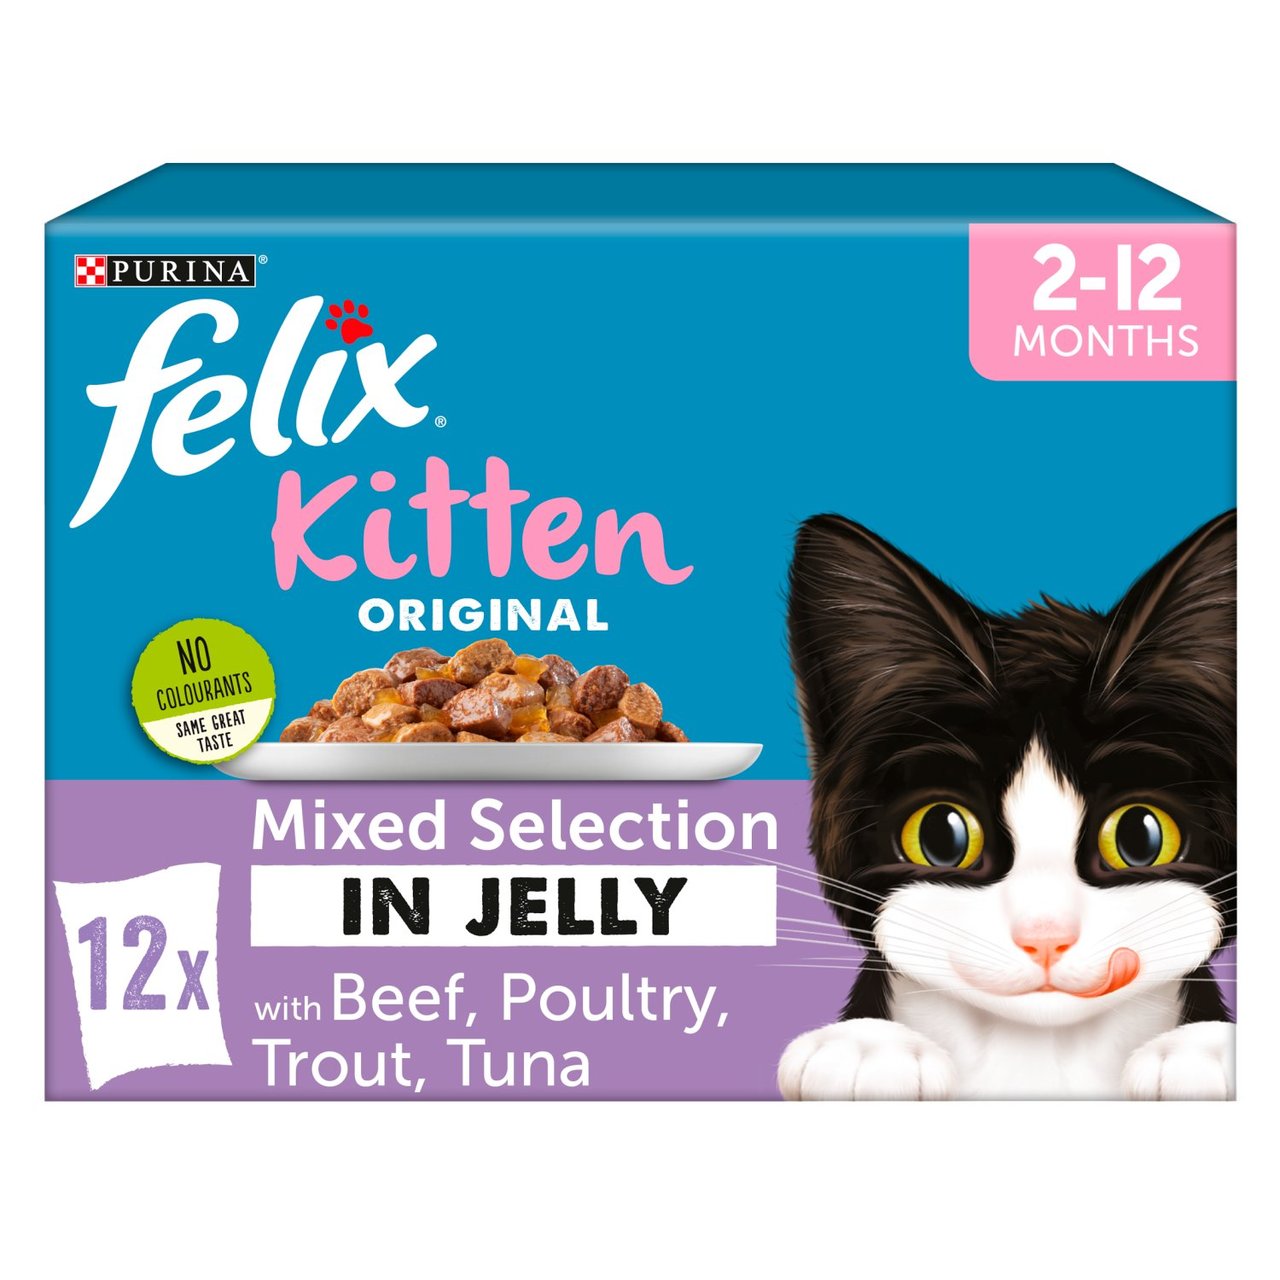 An image of Felix Kitten Mixed Selection in Jelly